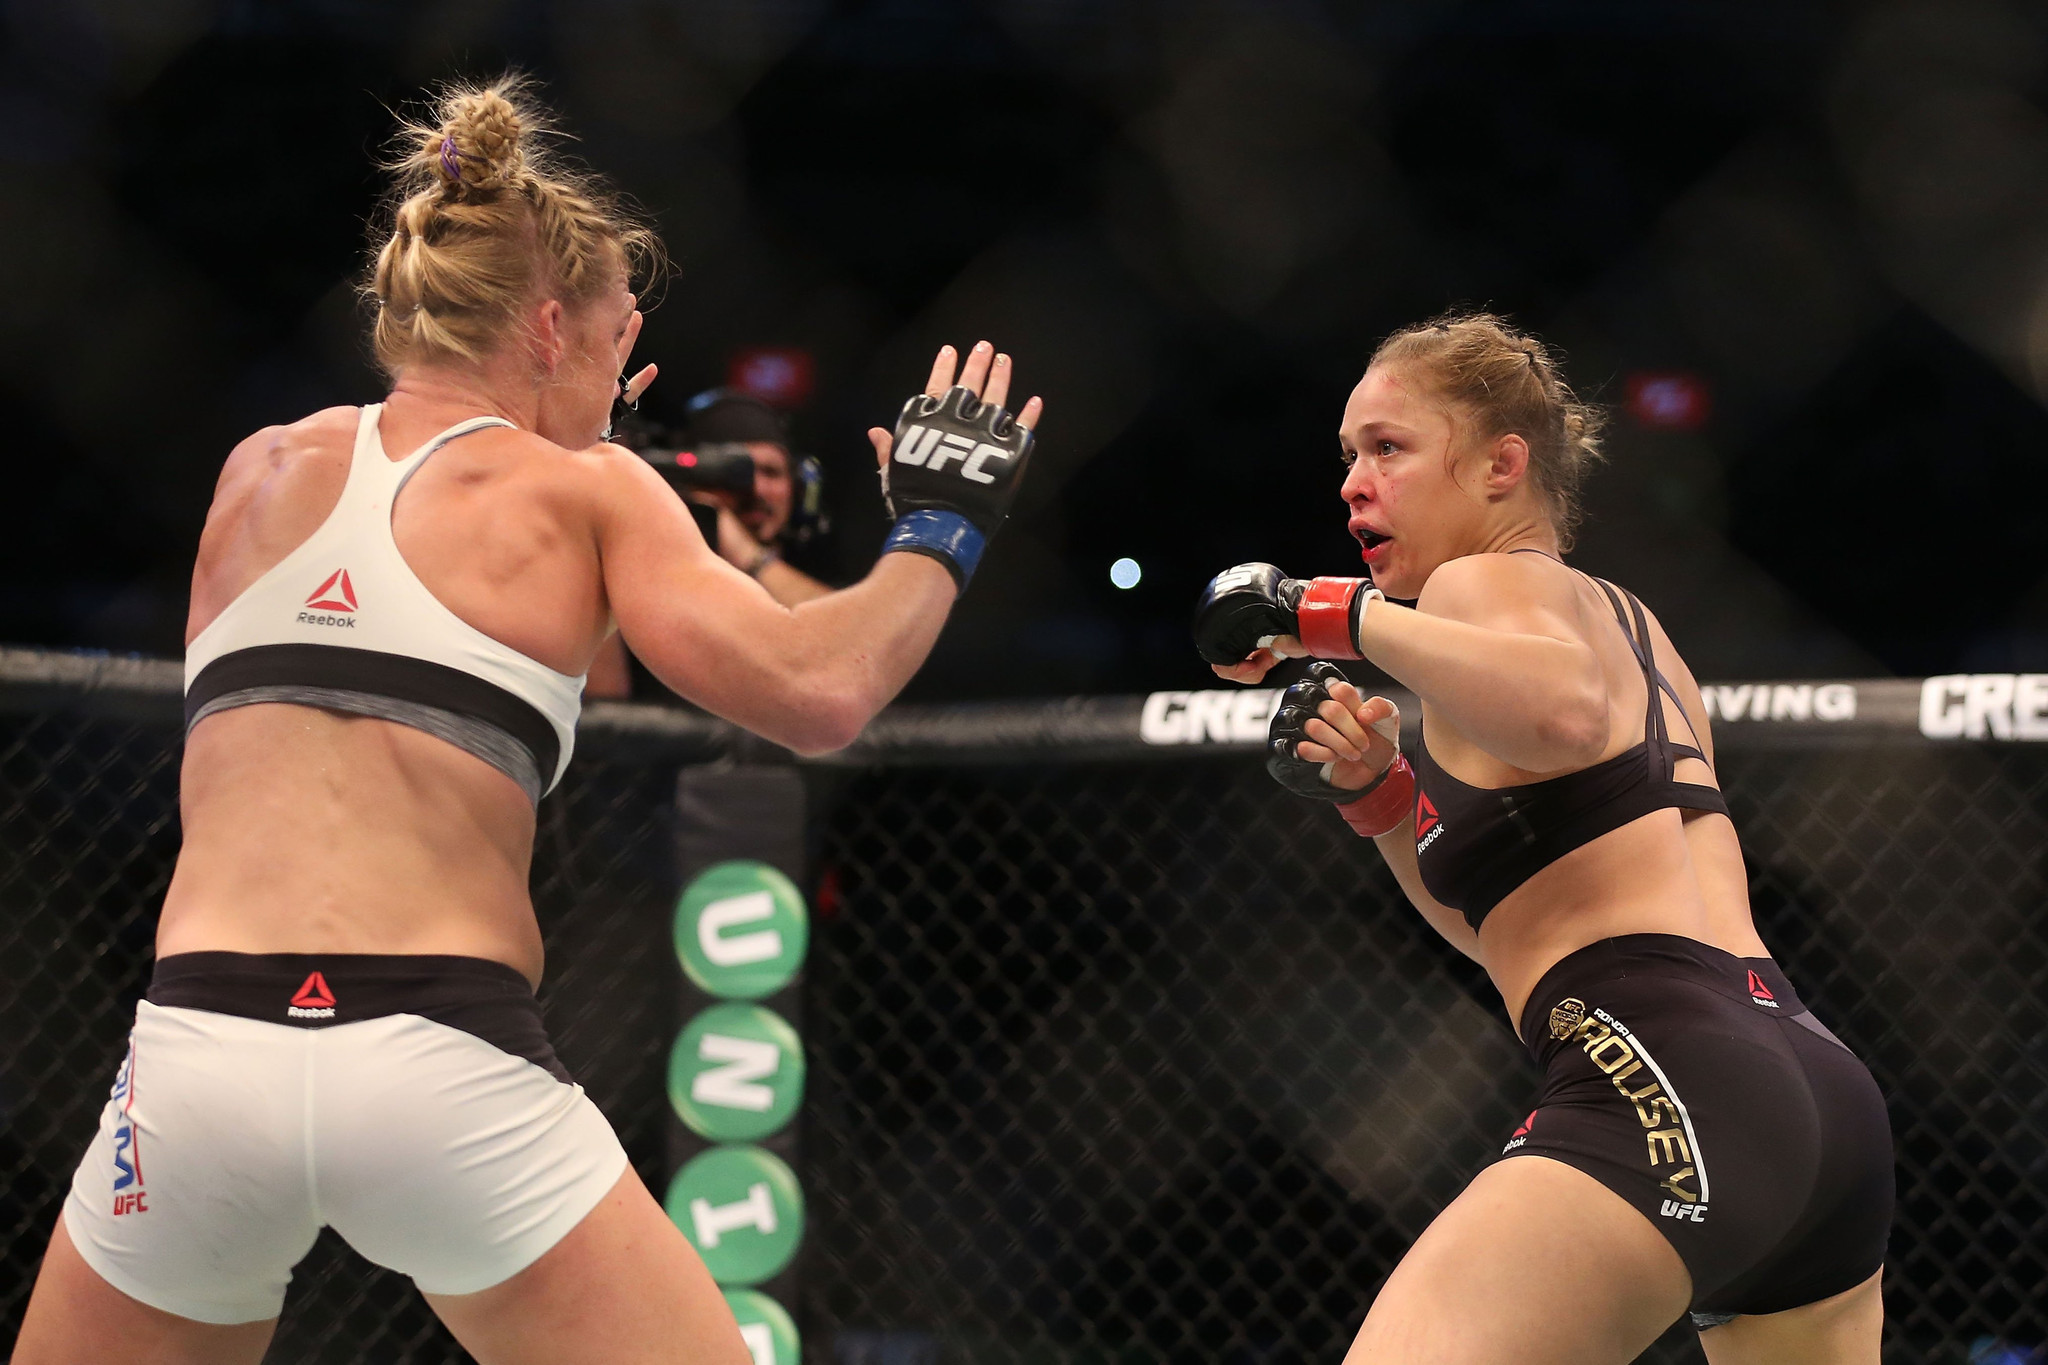 Ronda Rousey has earned right to rematch with Holly Holm, UFC president says - LA Times